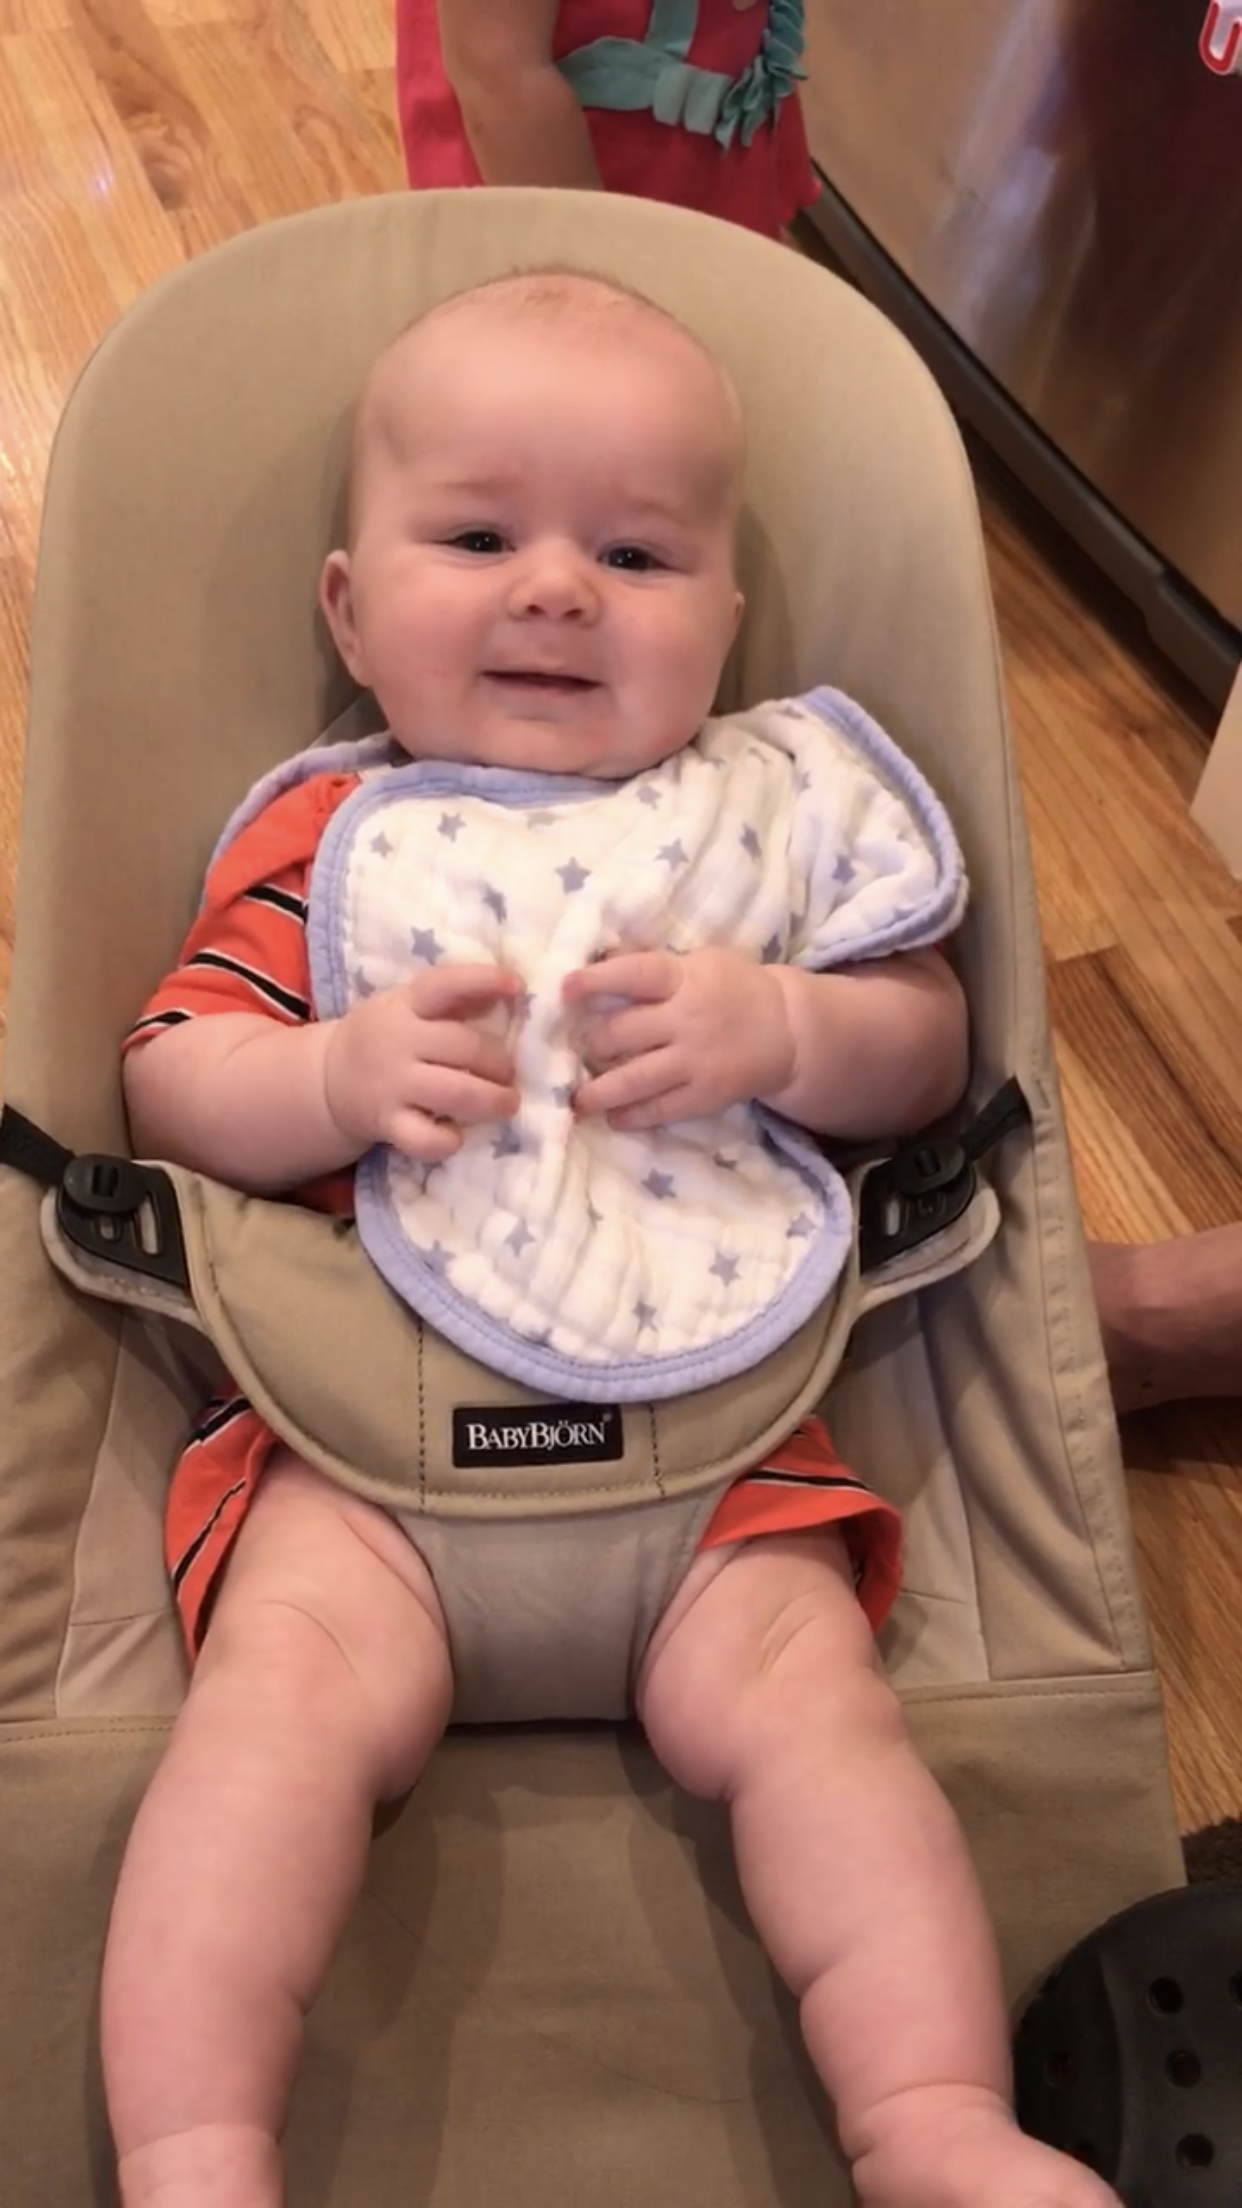 Baby Bjorn Bouncer (this is a screenshot from a video so pardon the poor quality!)